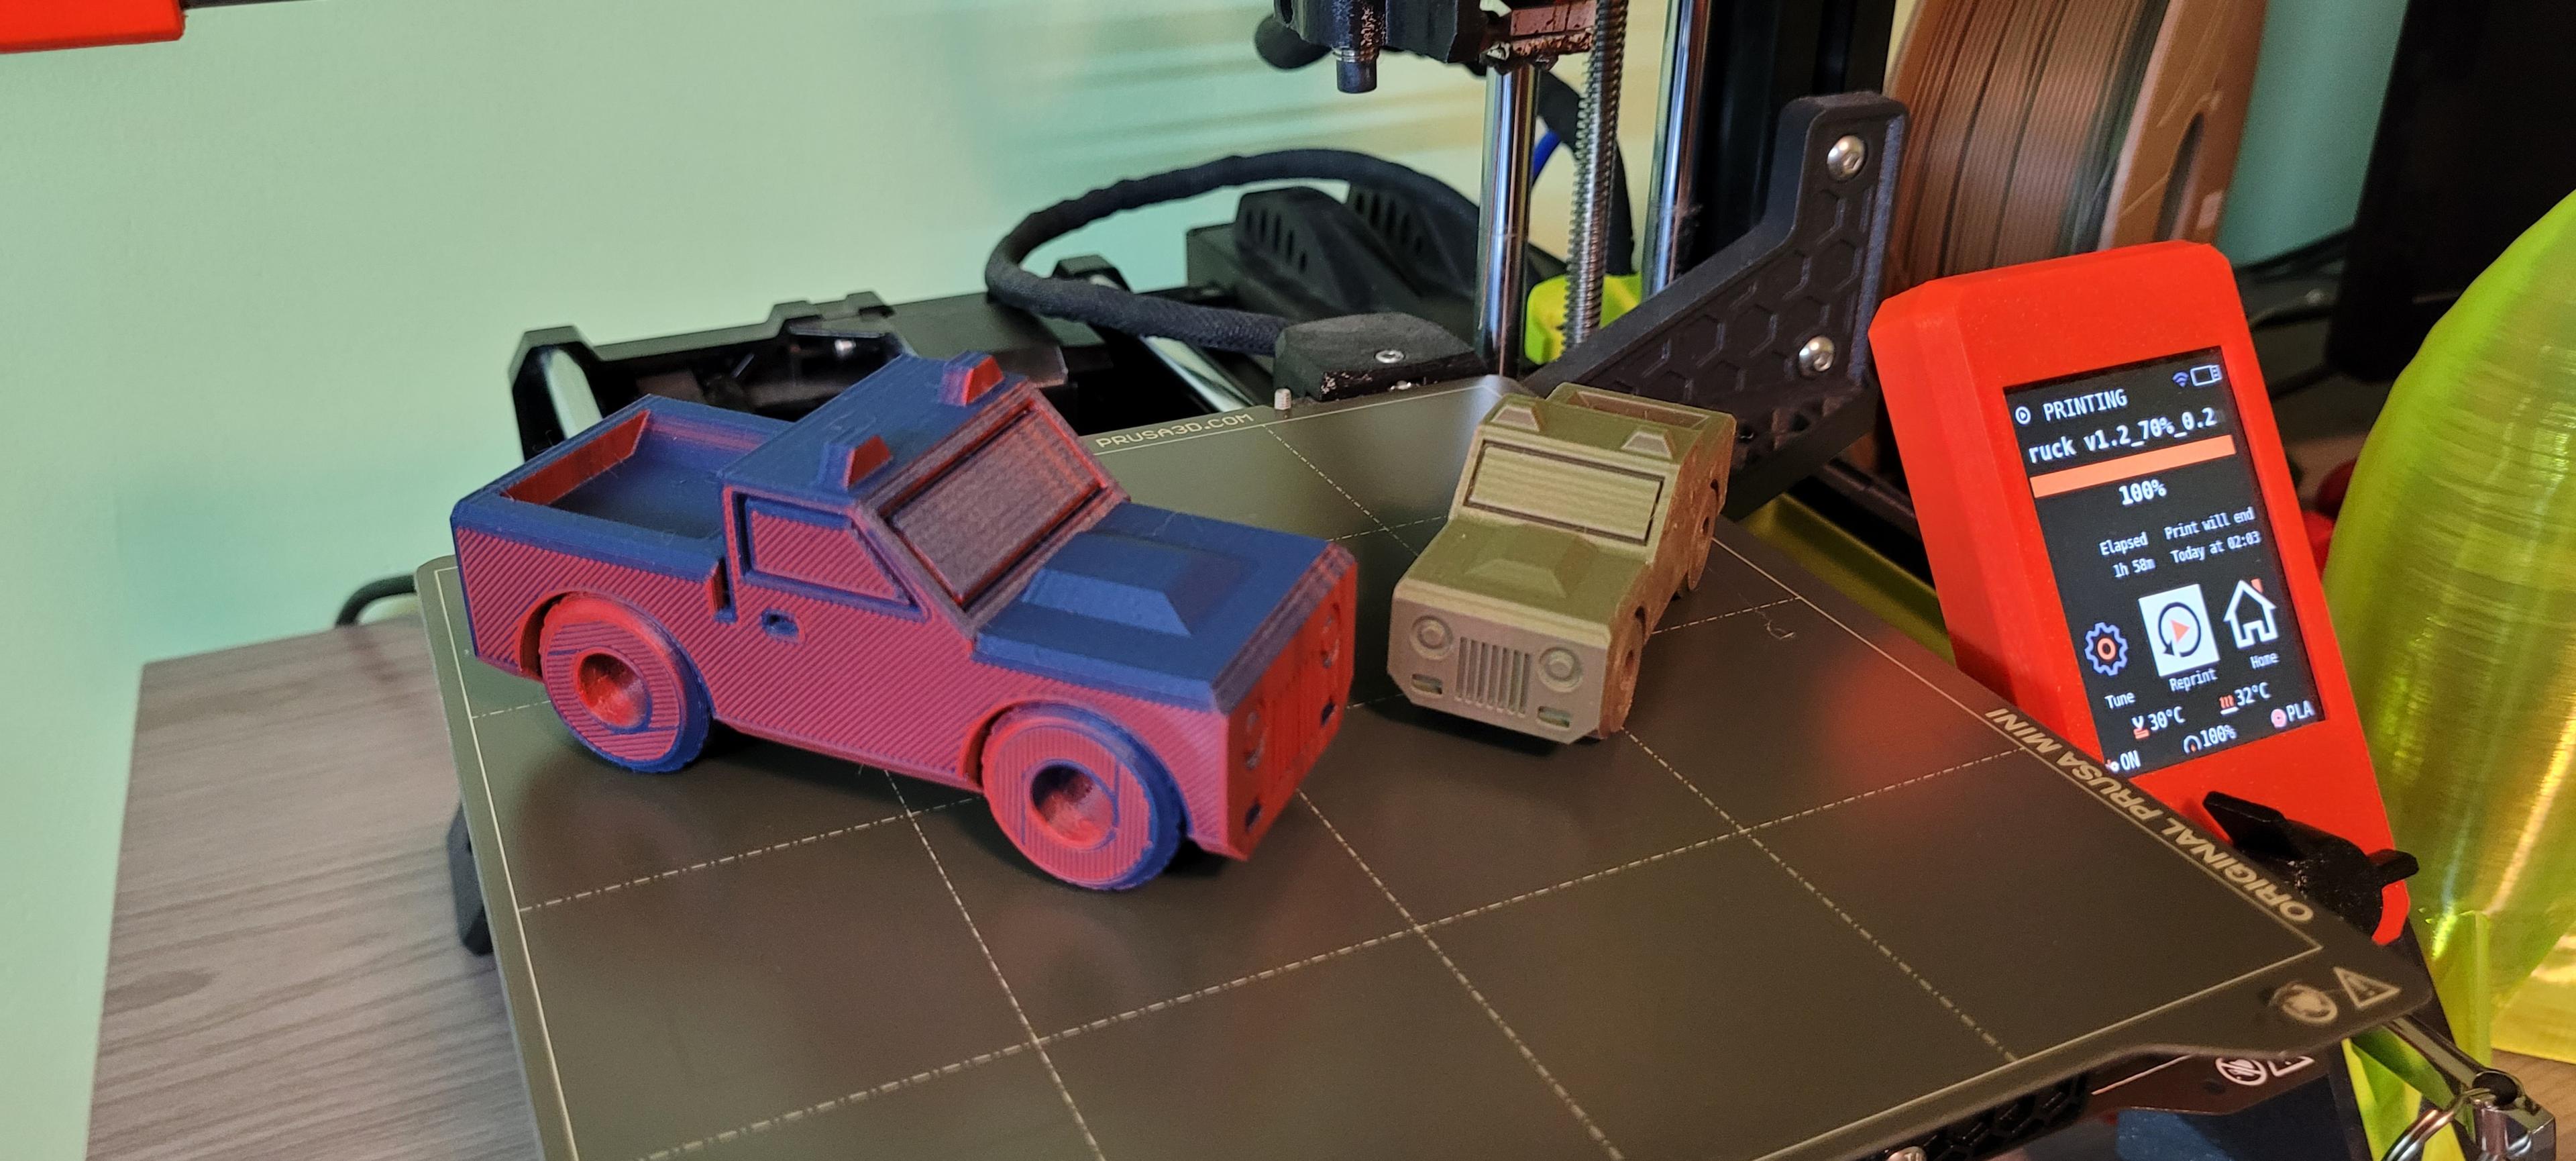 toy truck print in place 3d model